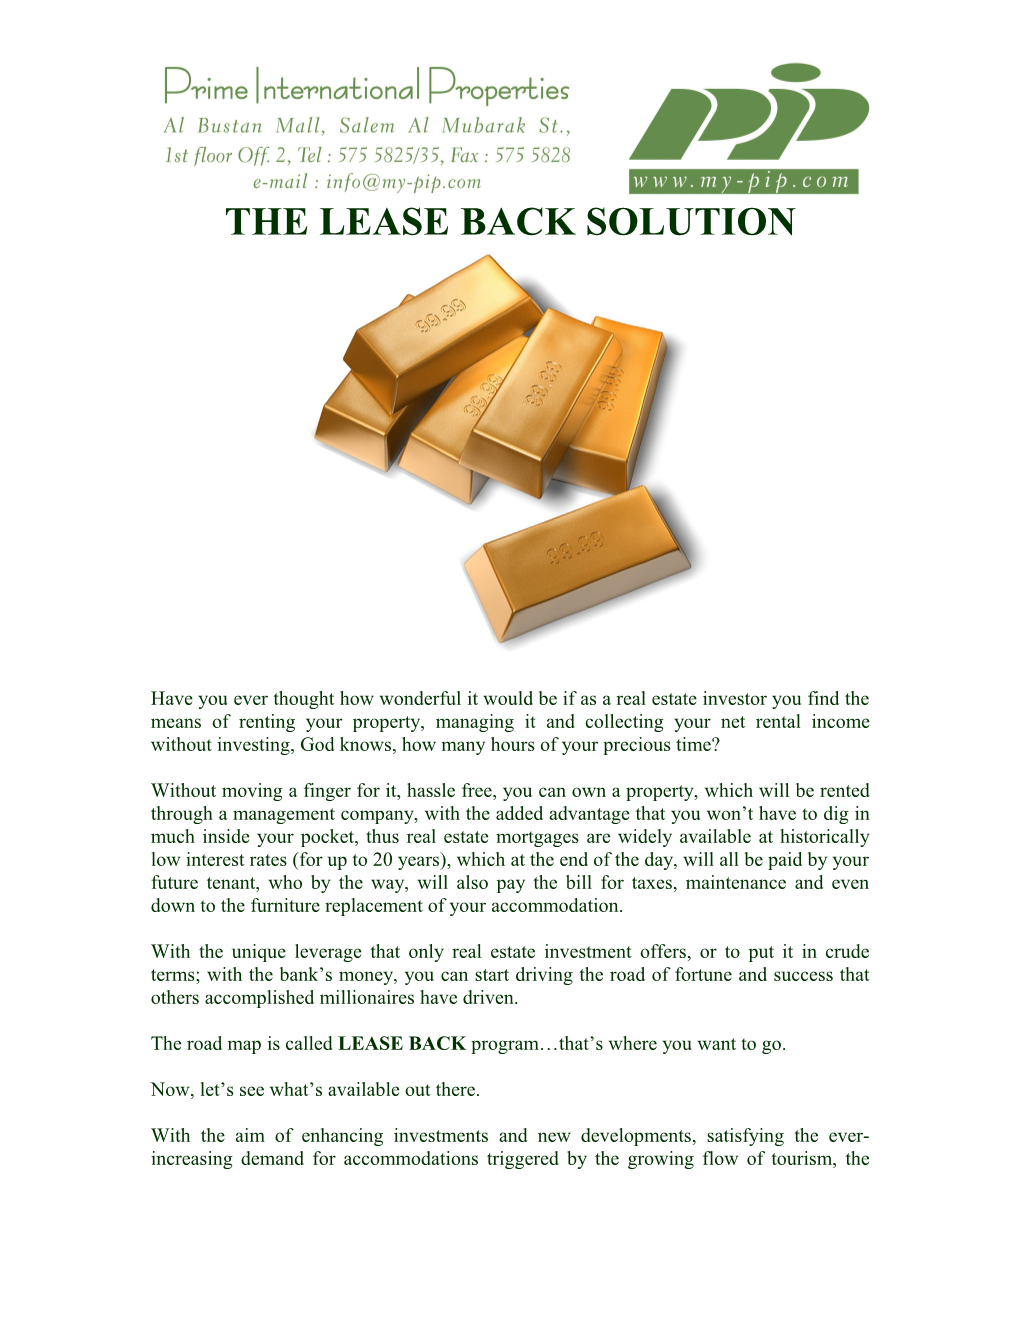 The Lease Back Solution